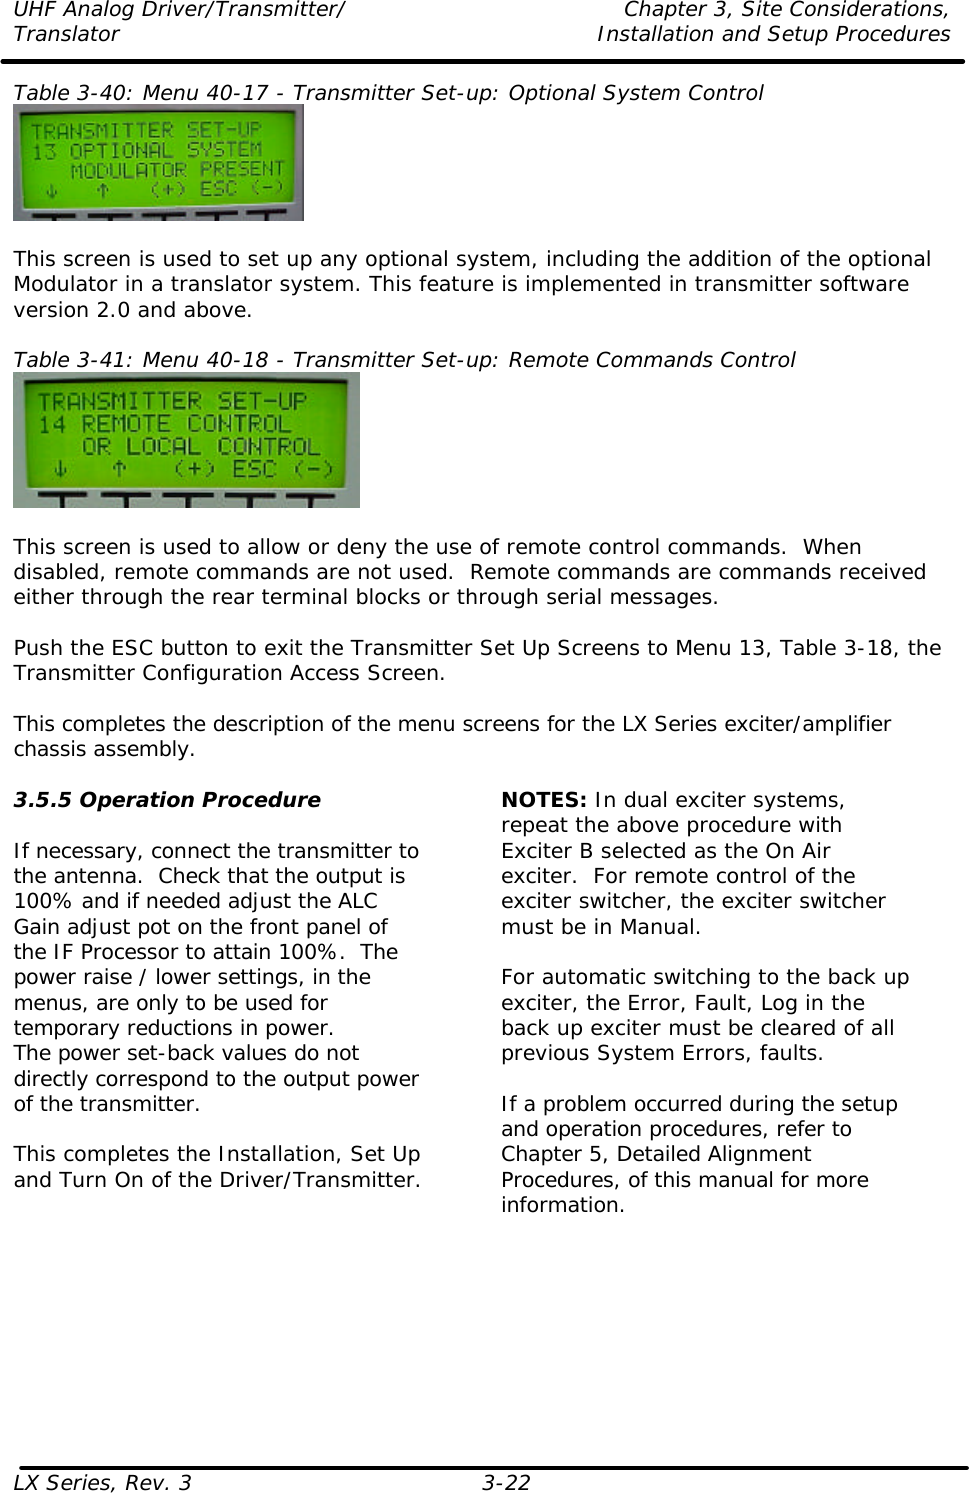 UHF Analog Driver/Transmitter/ Chapter 3, Site Considerations,  Translator Installation and Setup Procedures LX Series, Rev. 3 3-22 Table 3-40: Menu 40-17 - Transmitter Set-up: Optional System Control   This screen is used to set up any optional system, including the addition of the optional Modulator in a translator system. This feature is implemented in transmitter software version 2.0 and above.  Table 3-41: Menu 40-18 - Transmitter Set-up: Remote Commands Control   This screen is used to allow or deny the use of remote control commands.  When disabled, remote commands are not used.  Remote commands are commands received either through the rear terminal blocks or through serial messages.  Push the ESC button to exit the Transmitter Set Up Screens to Menu 13, Table 3-18, the Transmitter Configuration Access Screen.  This completes the description of the menu screens for the LX Series exciter/amplifier chassis assembly.  3.5.5 Operation Procedure  If necessary, connect the transmitter to the antenna.  Check that the output is 100% and if needed adjust the ALC Gain adjust pot on the front panel of the IF Processor to attain 100%.  The power raise / lower settings, in the menus, are only to be used for temporary reductions in power. The power set-back values do not directly correspond to the output power of the transmitter.  This completes the Installation, Set Up and Turn On of the Driver/Transmitter.  NOTES: In dual exciter systems, repeat the above procedure with Exciter B selected as the On Air exciter.  For remote control of the exciter switcher, the exciter switcher must be in Manual.  For automatic switching to the back up exciter, the Error, Fault, Log in the back up exciter must be cleared of all previous System Errors, faults.  If a problem occurred during the setup and operation procedures, refer to Chapter 5, Detailed Alignment Procedures, of this manual for more information.  